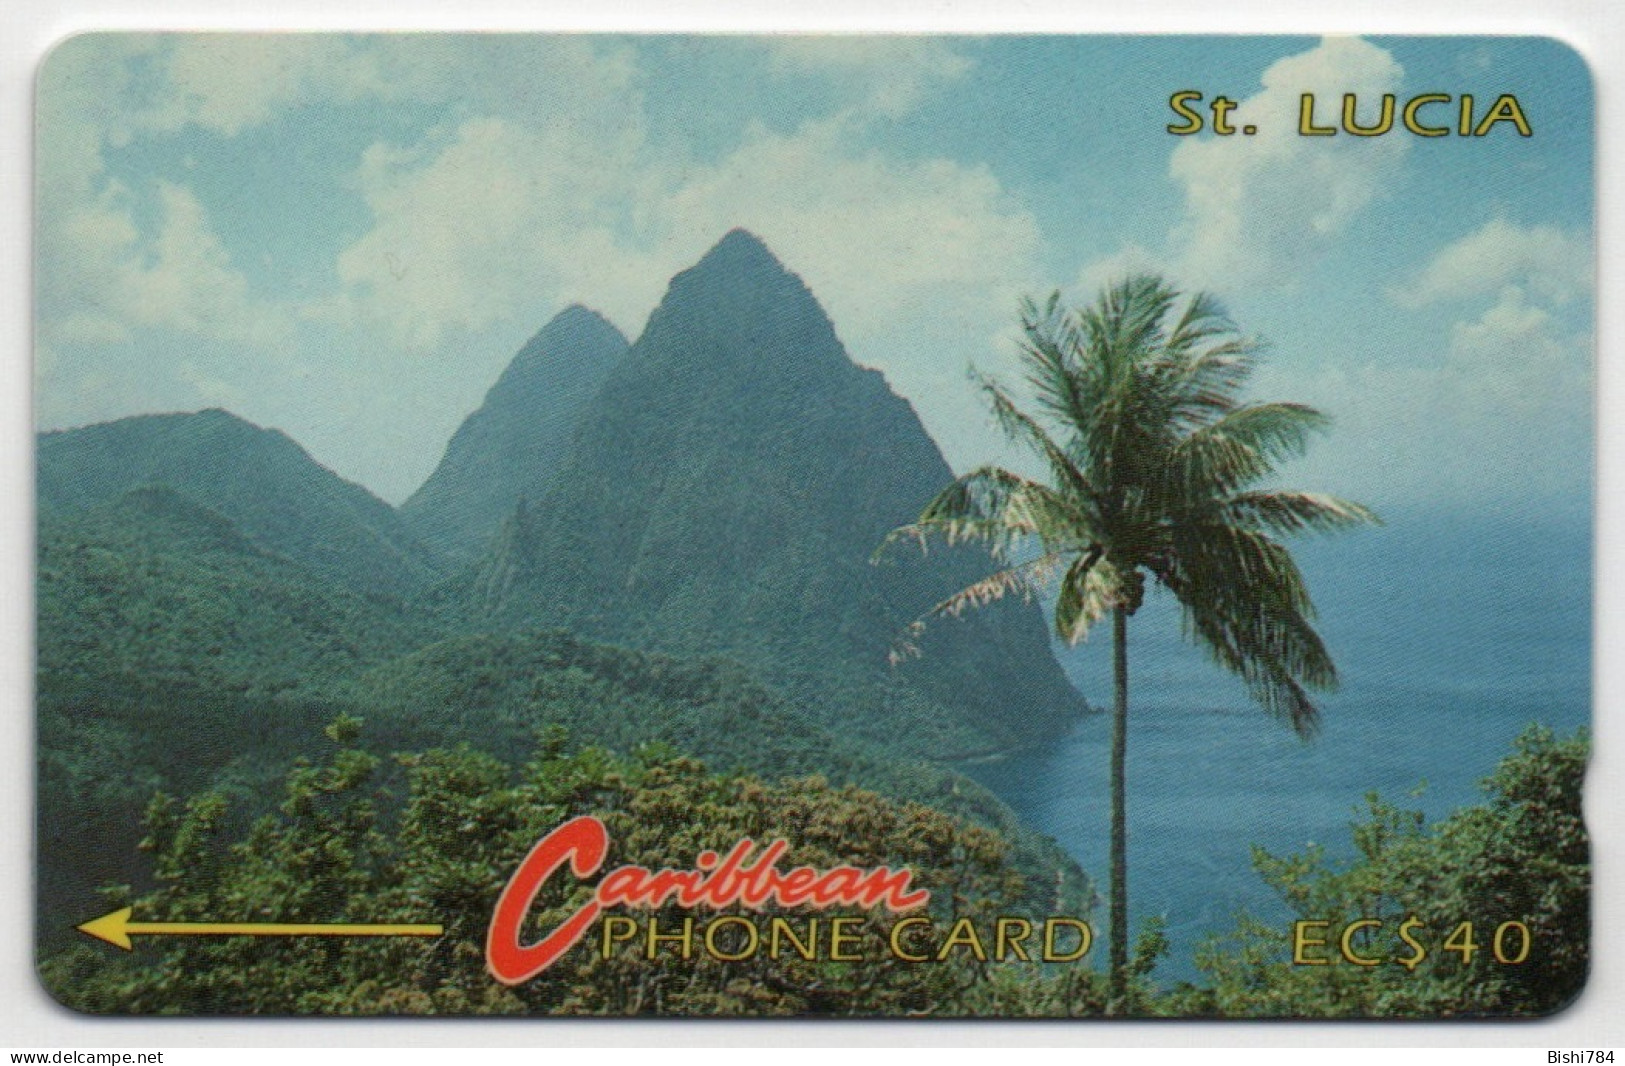 St. Lucia - Pitons - 3CSLC (Short, Italic Font With Curved 3) - Santa Lucía